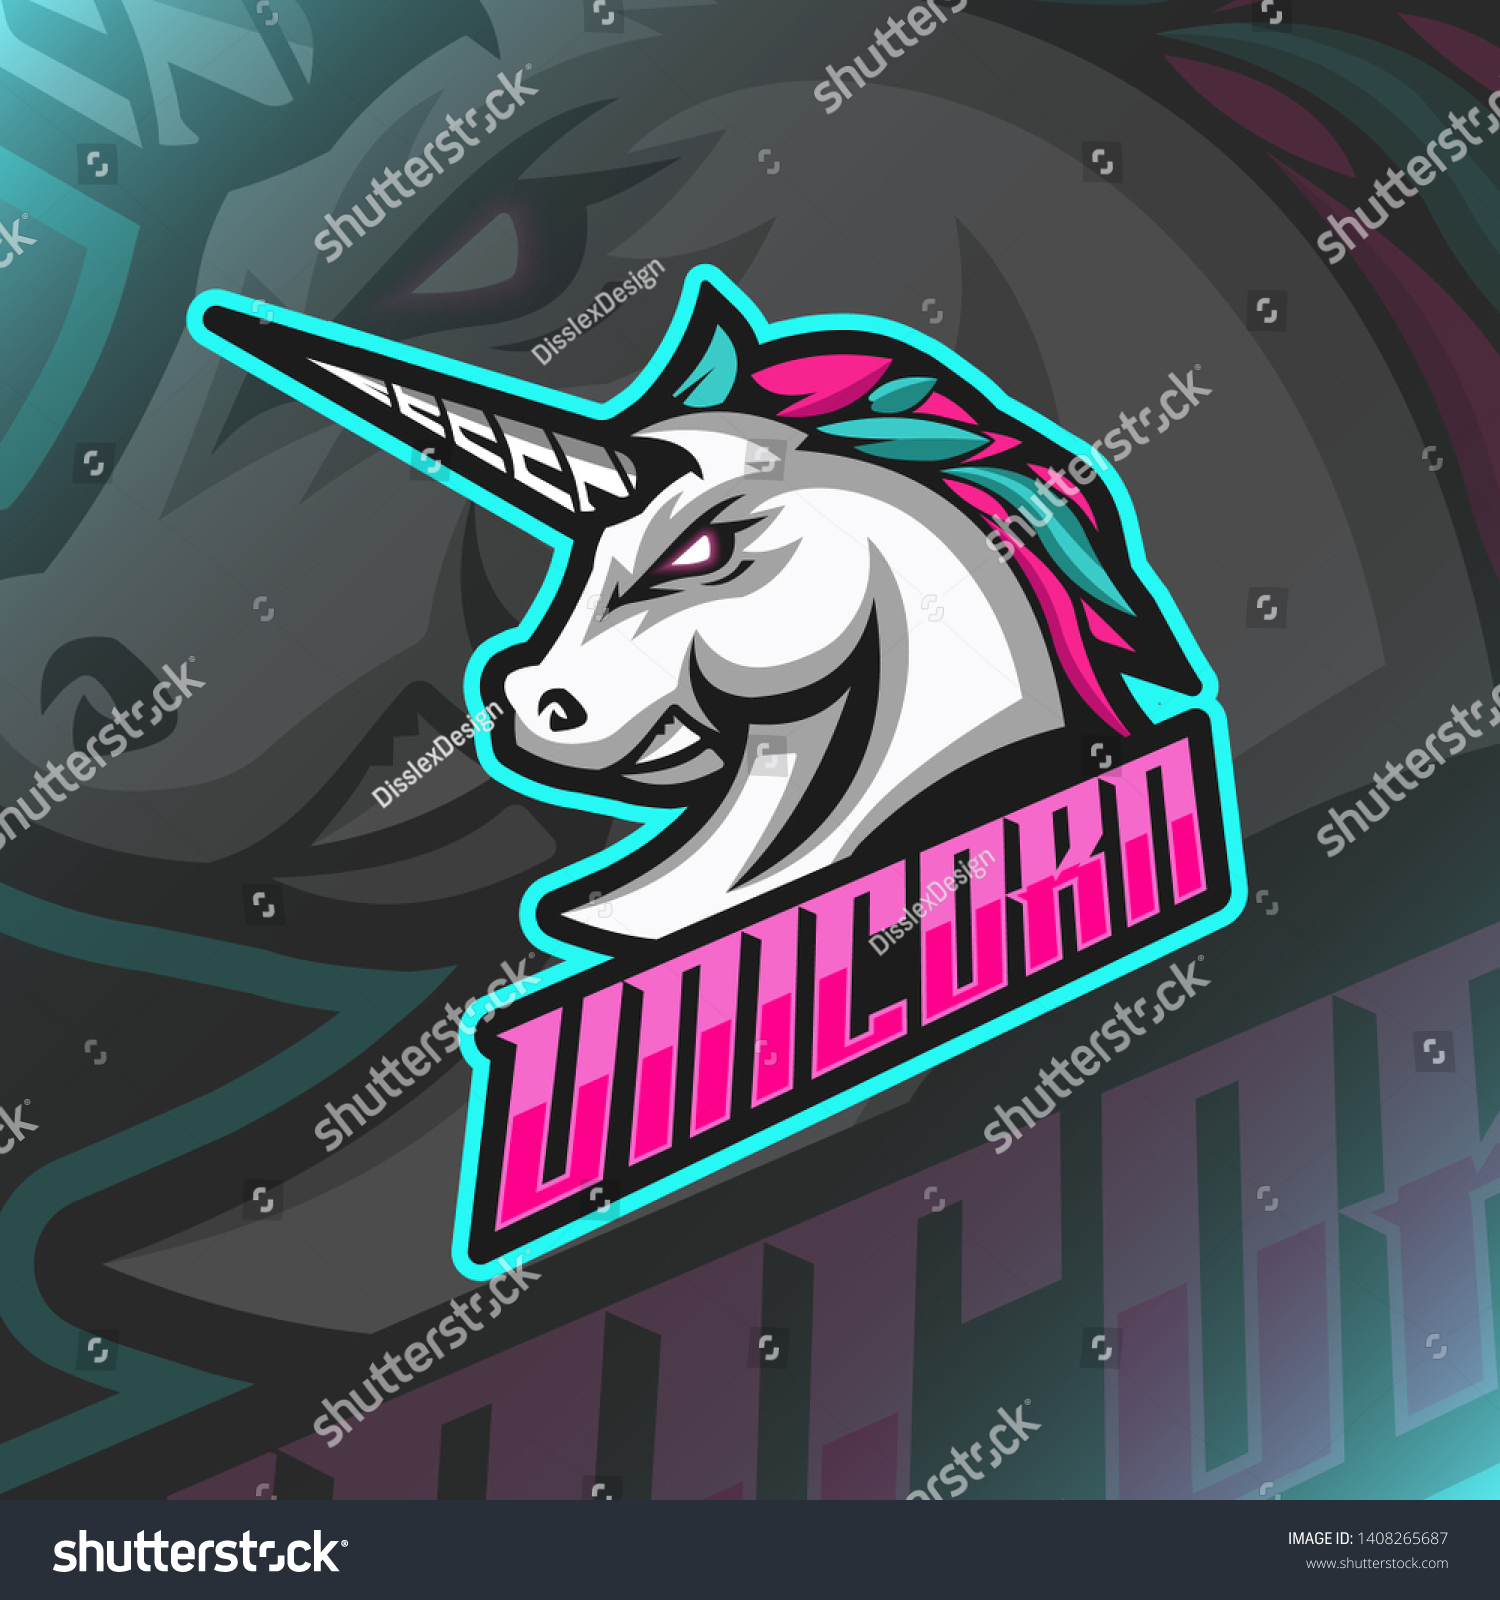 SVG of Unicorn Logo Mascot Vector Illustration with angry face for logo gaming template svg